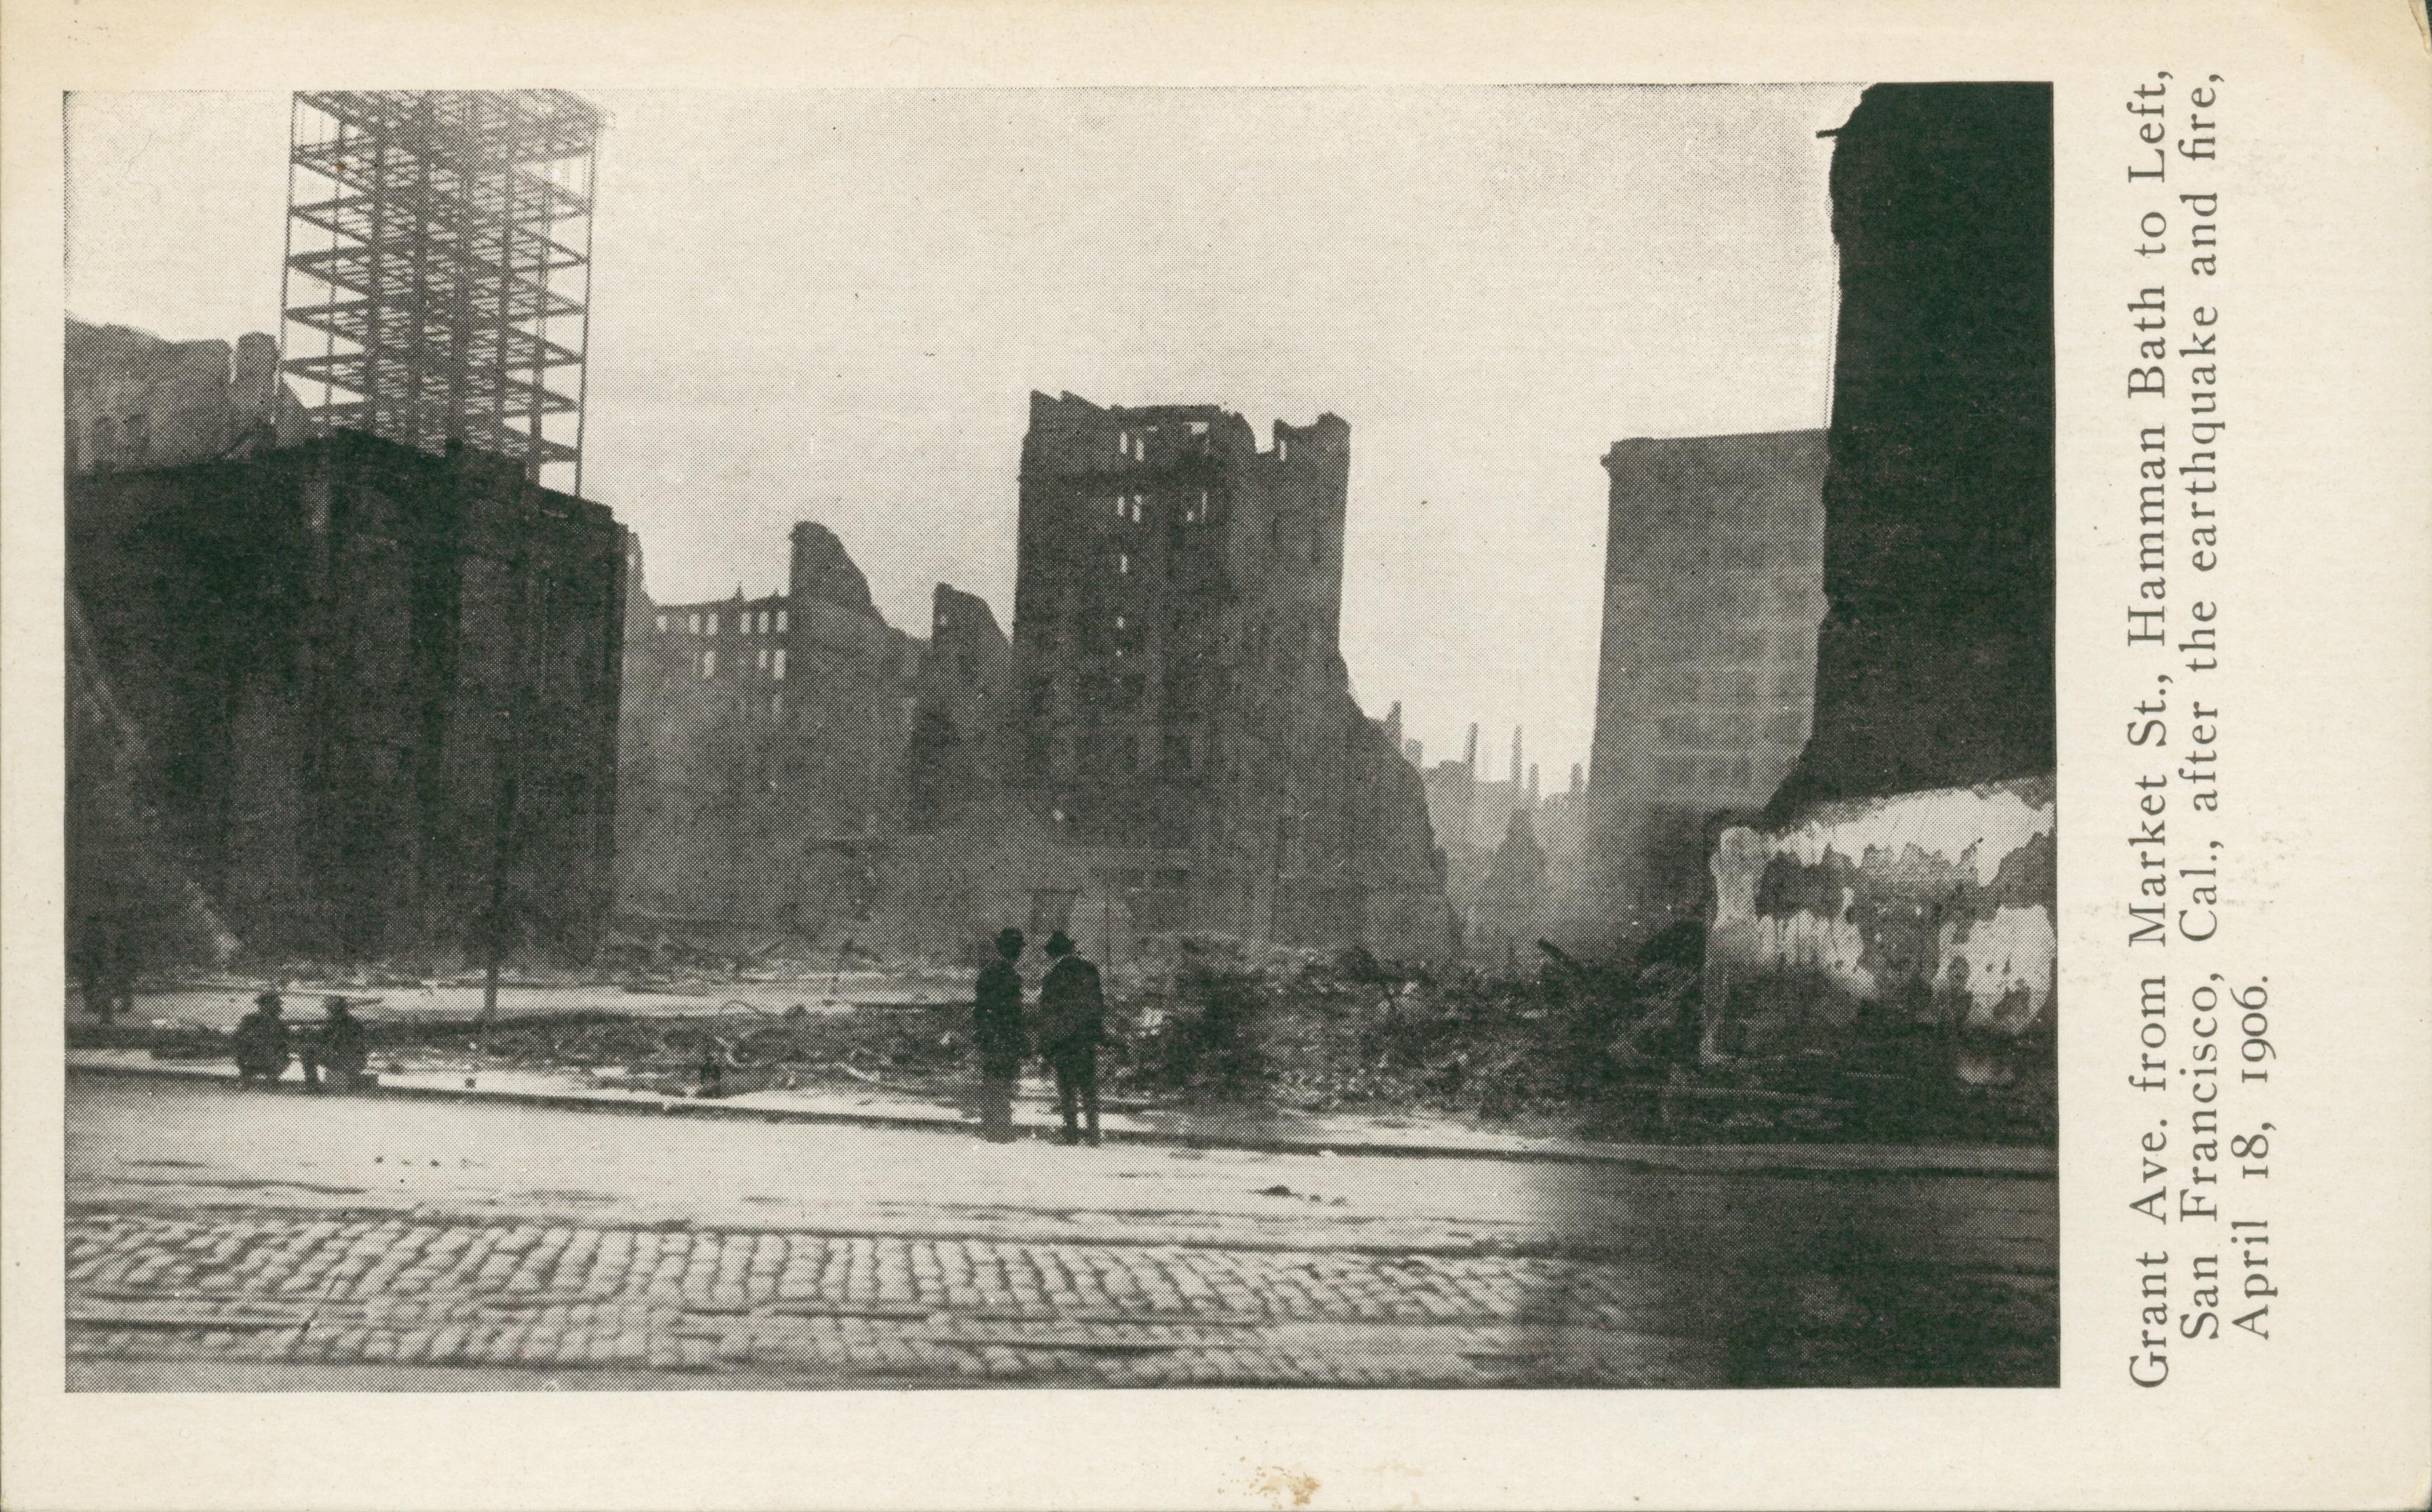 Shows four men looking at several destroyed buildings.